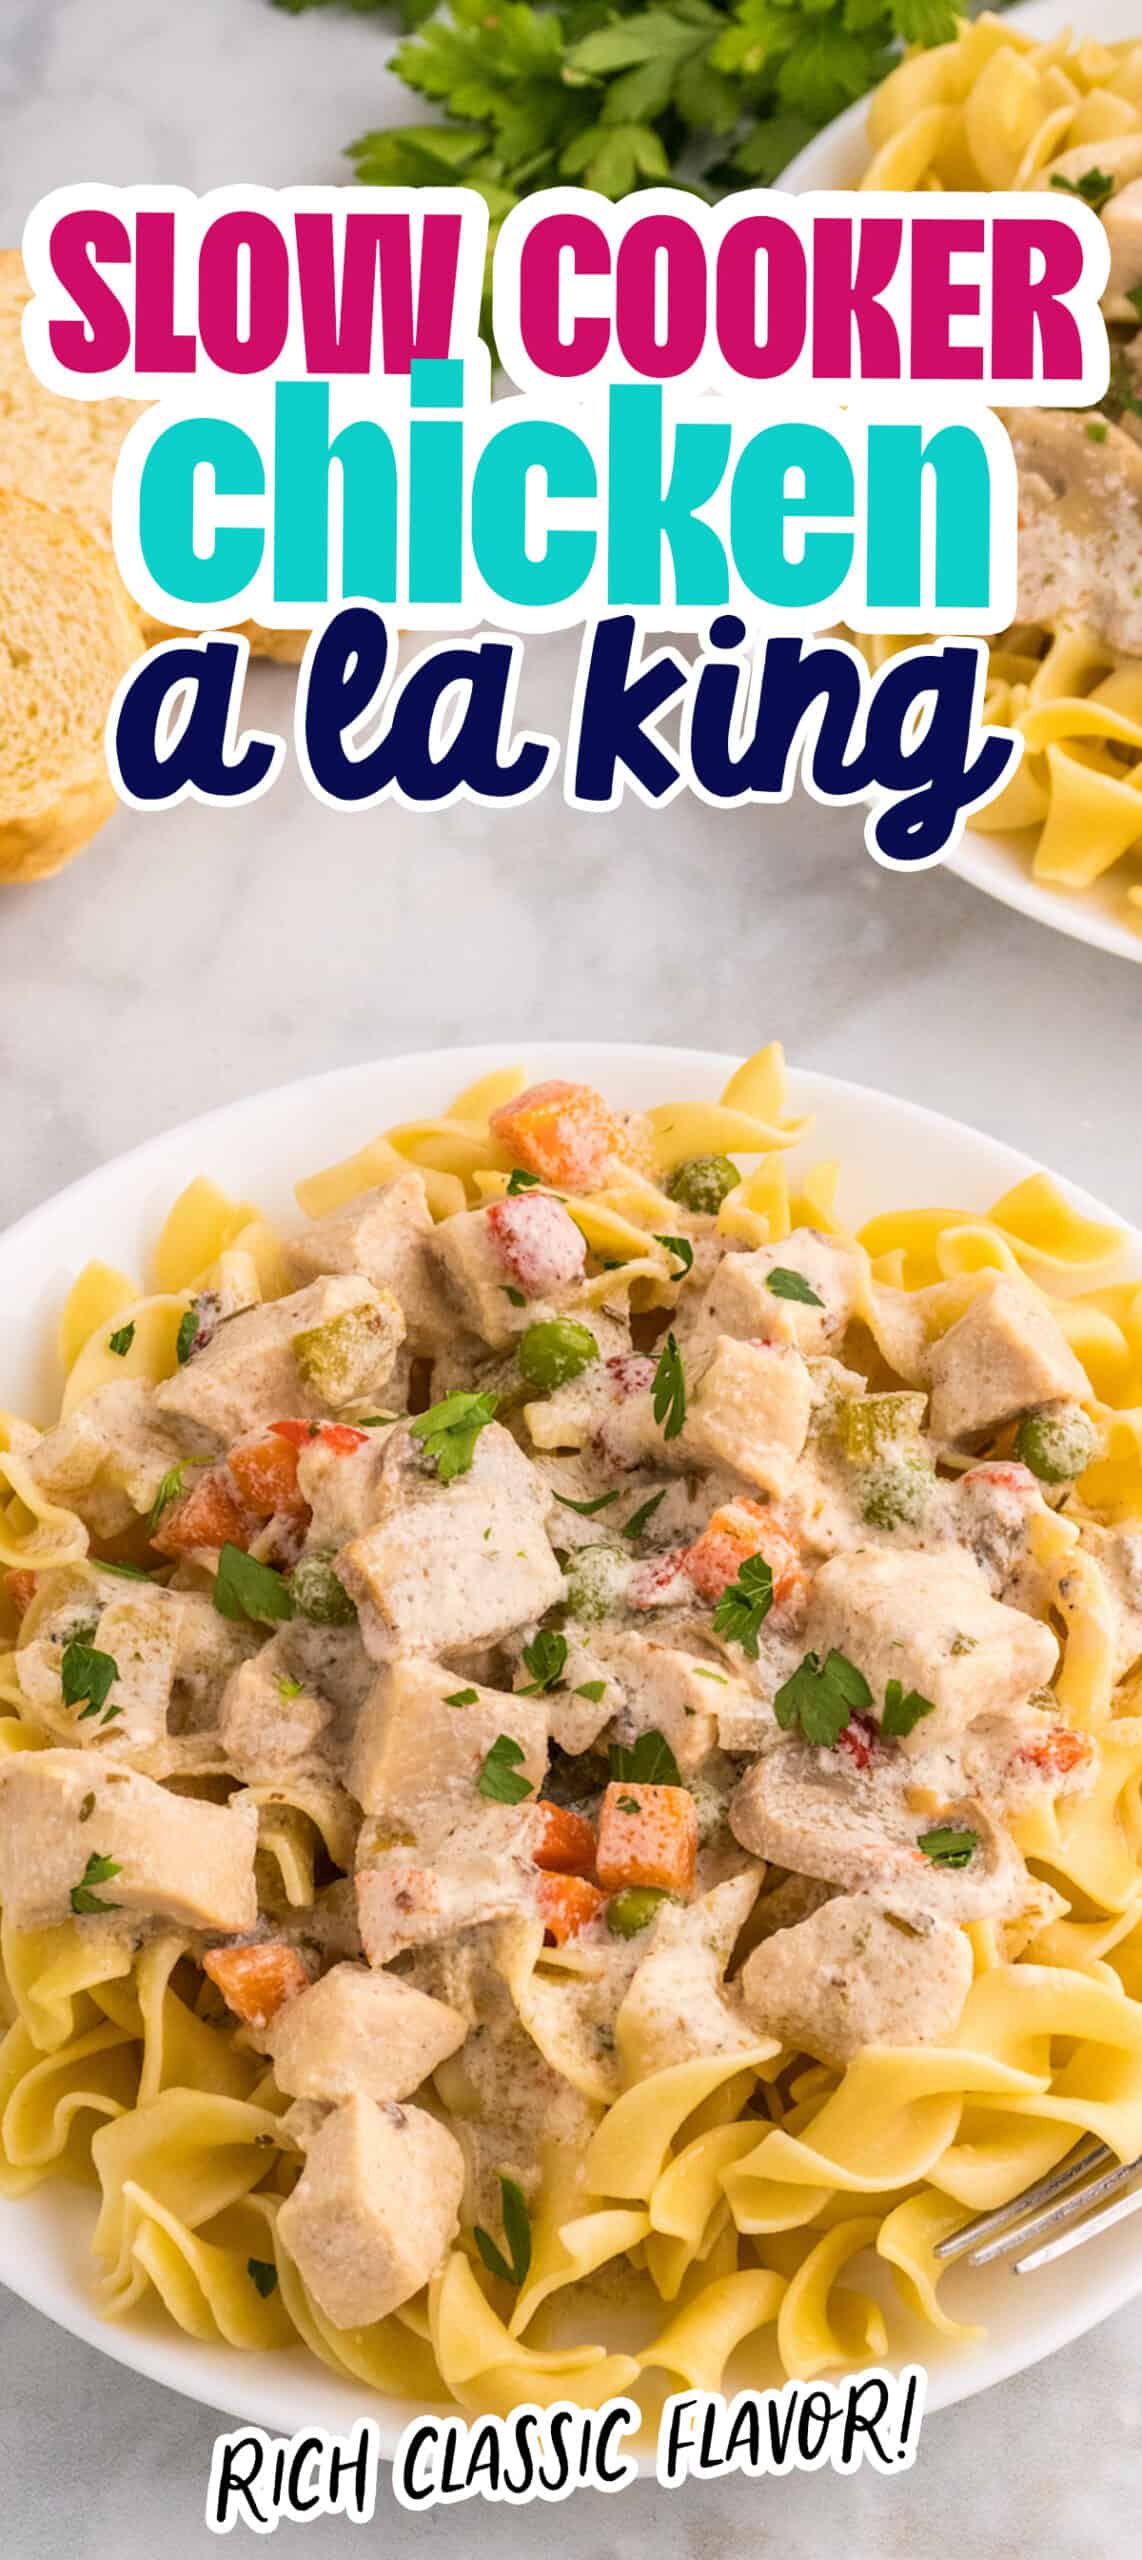 Slow Cooker Chicken a la King, the ultimate recipe fit for a King.